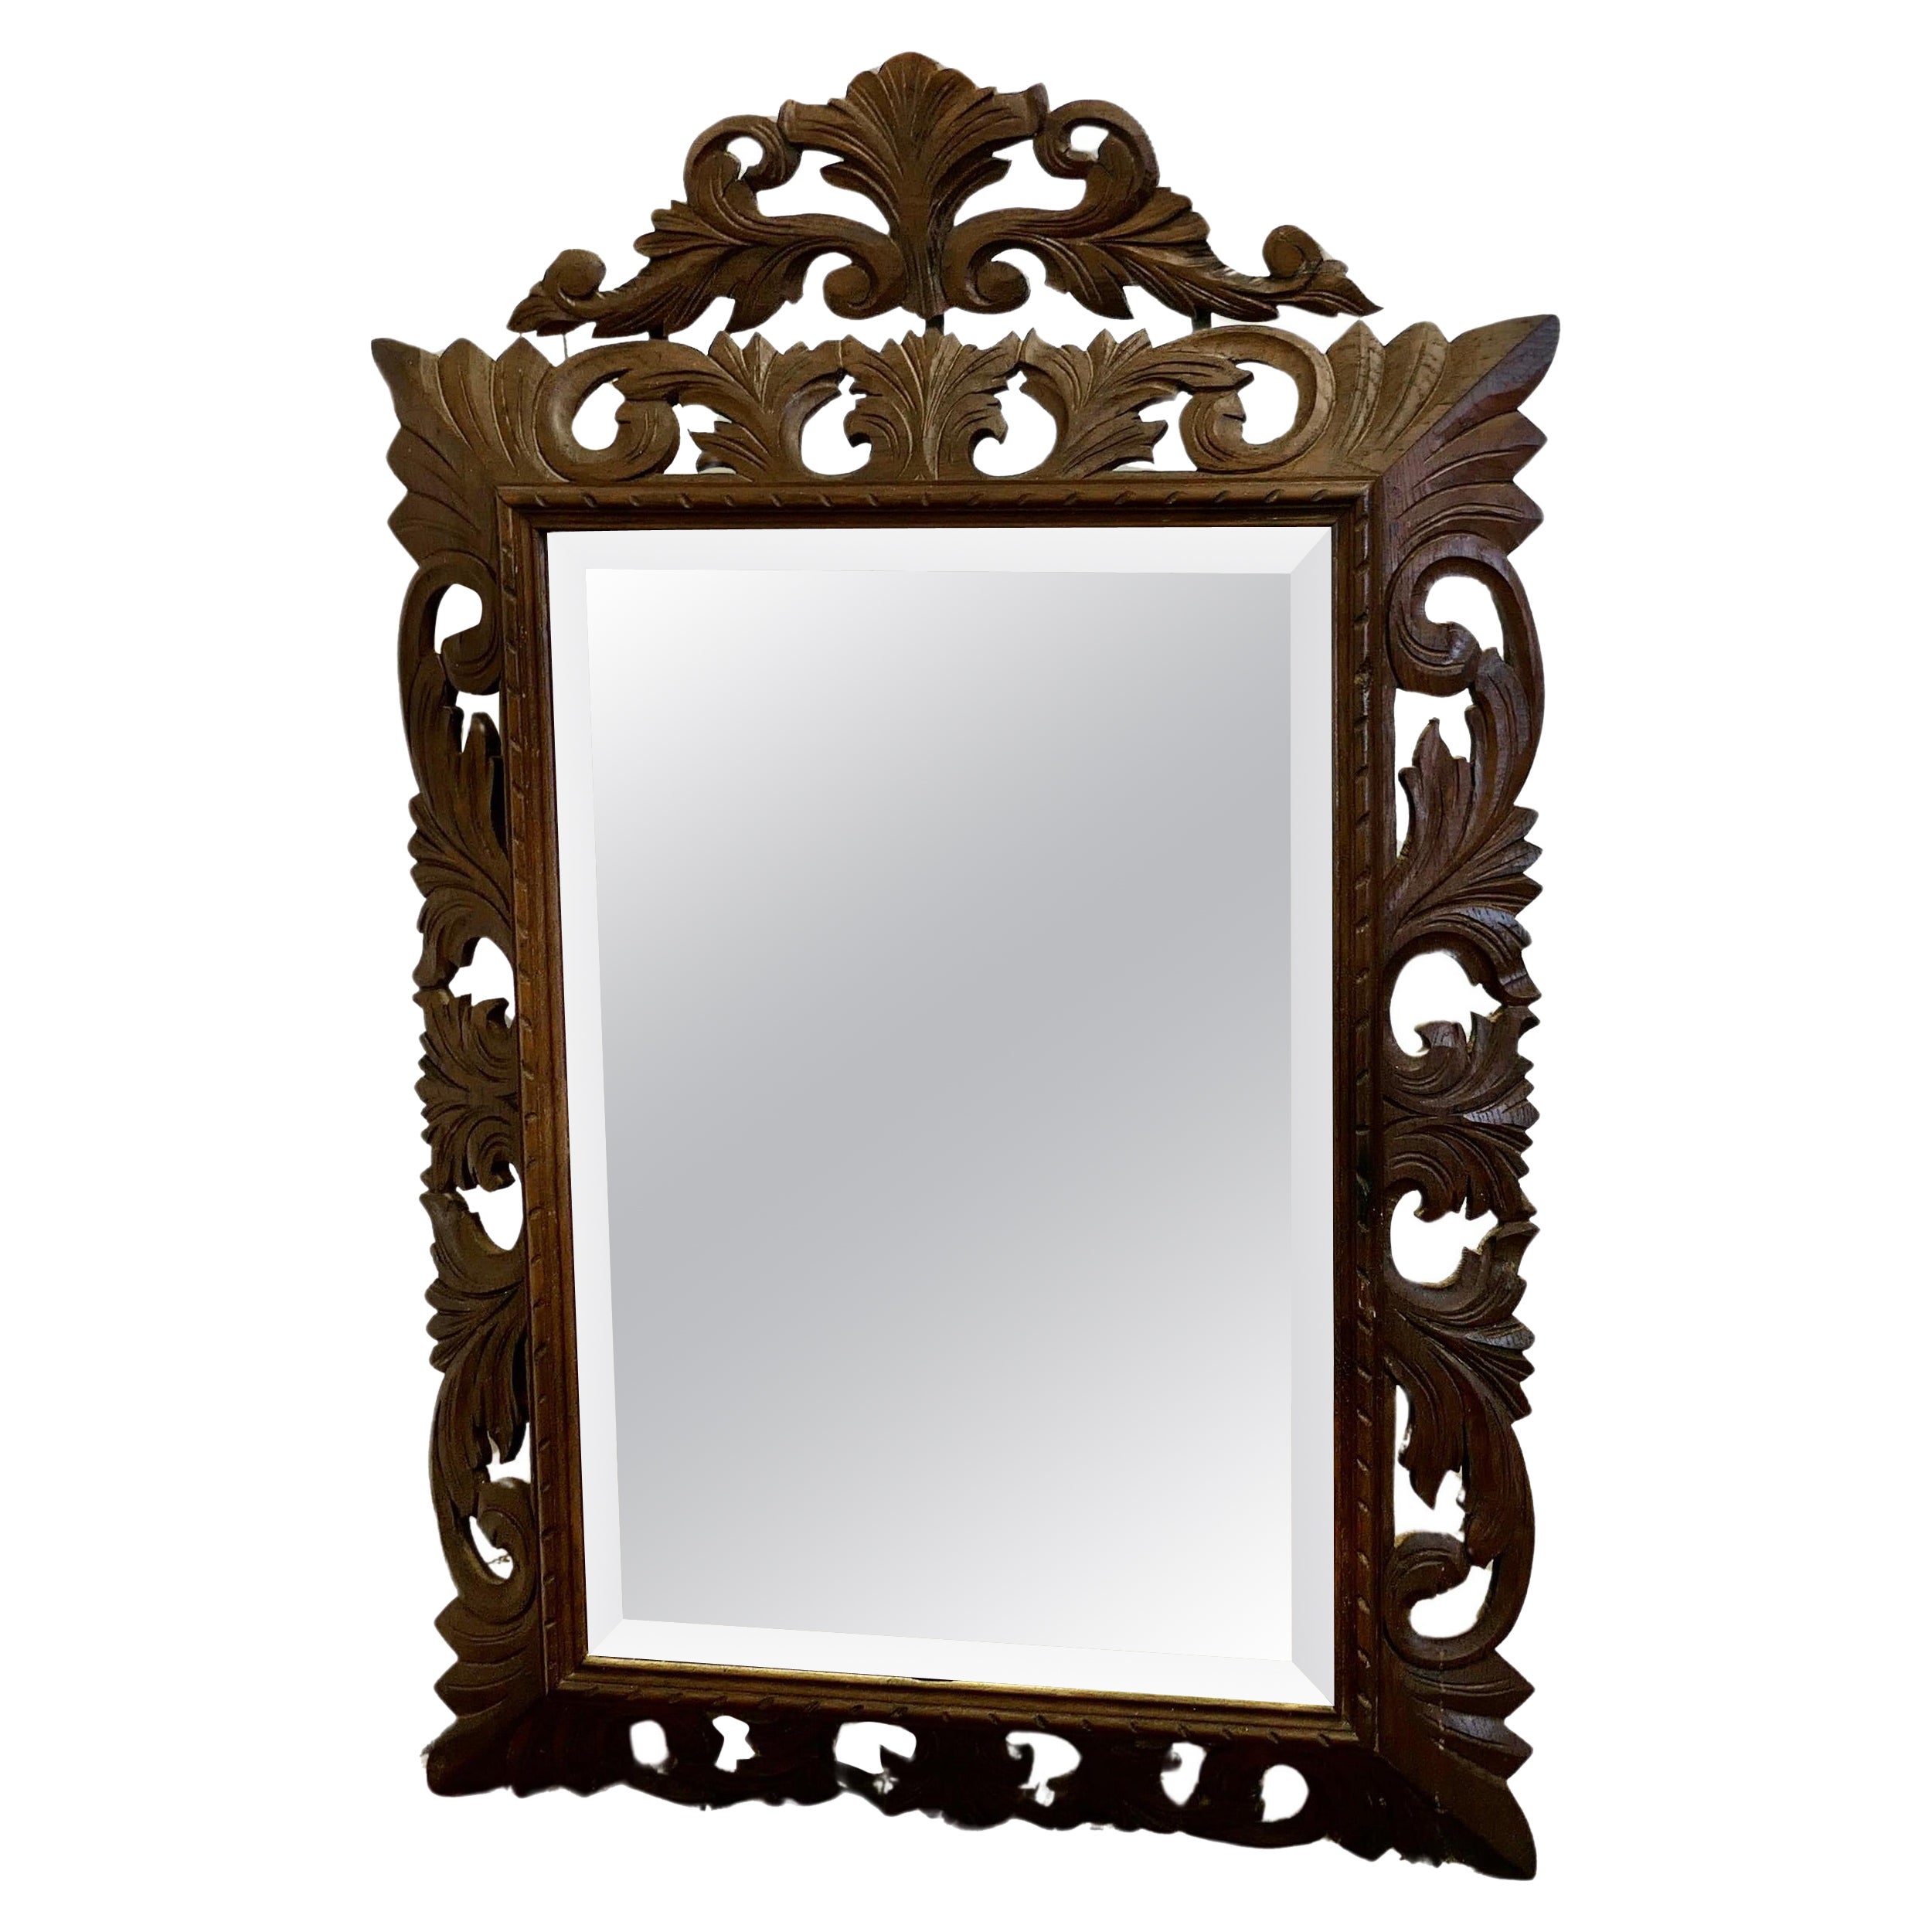 French Carved Gothic Oak Wall Mirror  The Oak Mirror Frame is Crisply Carved 